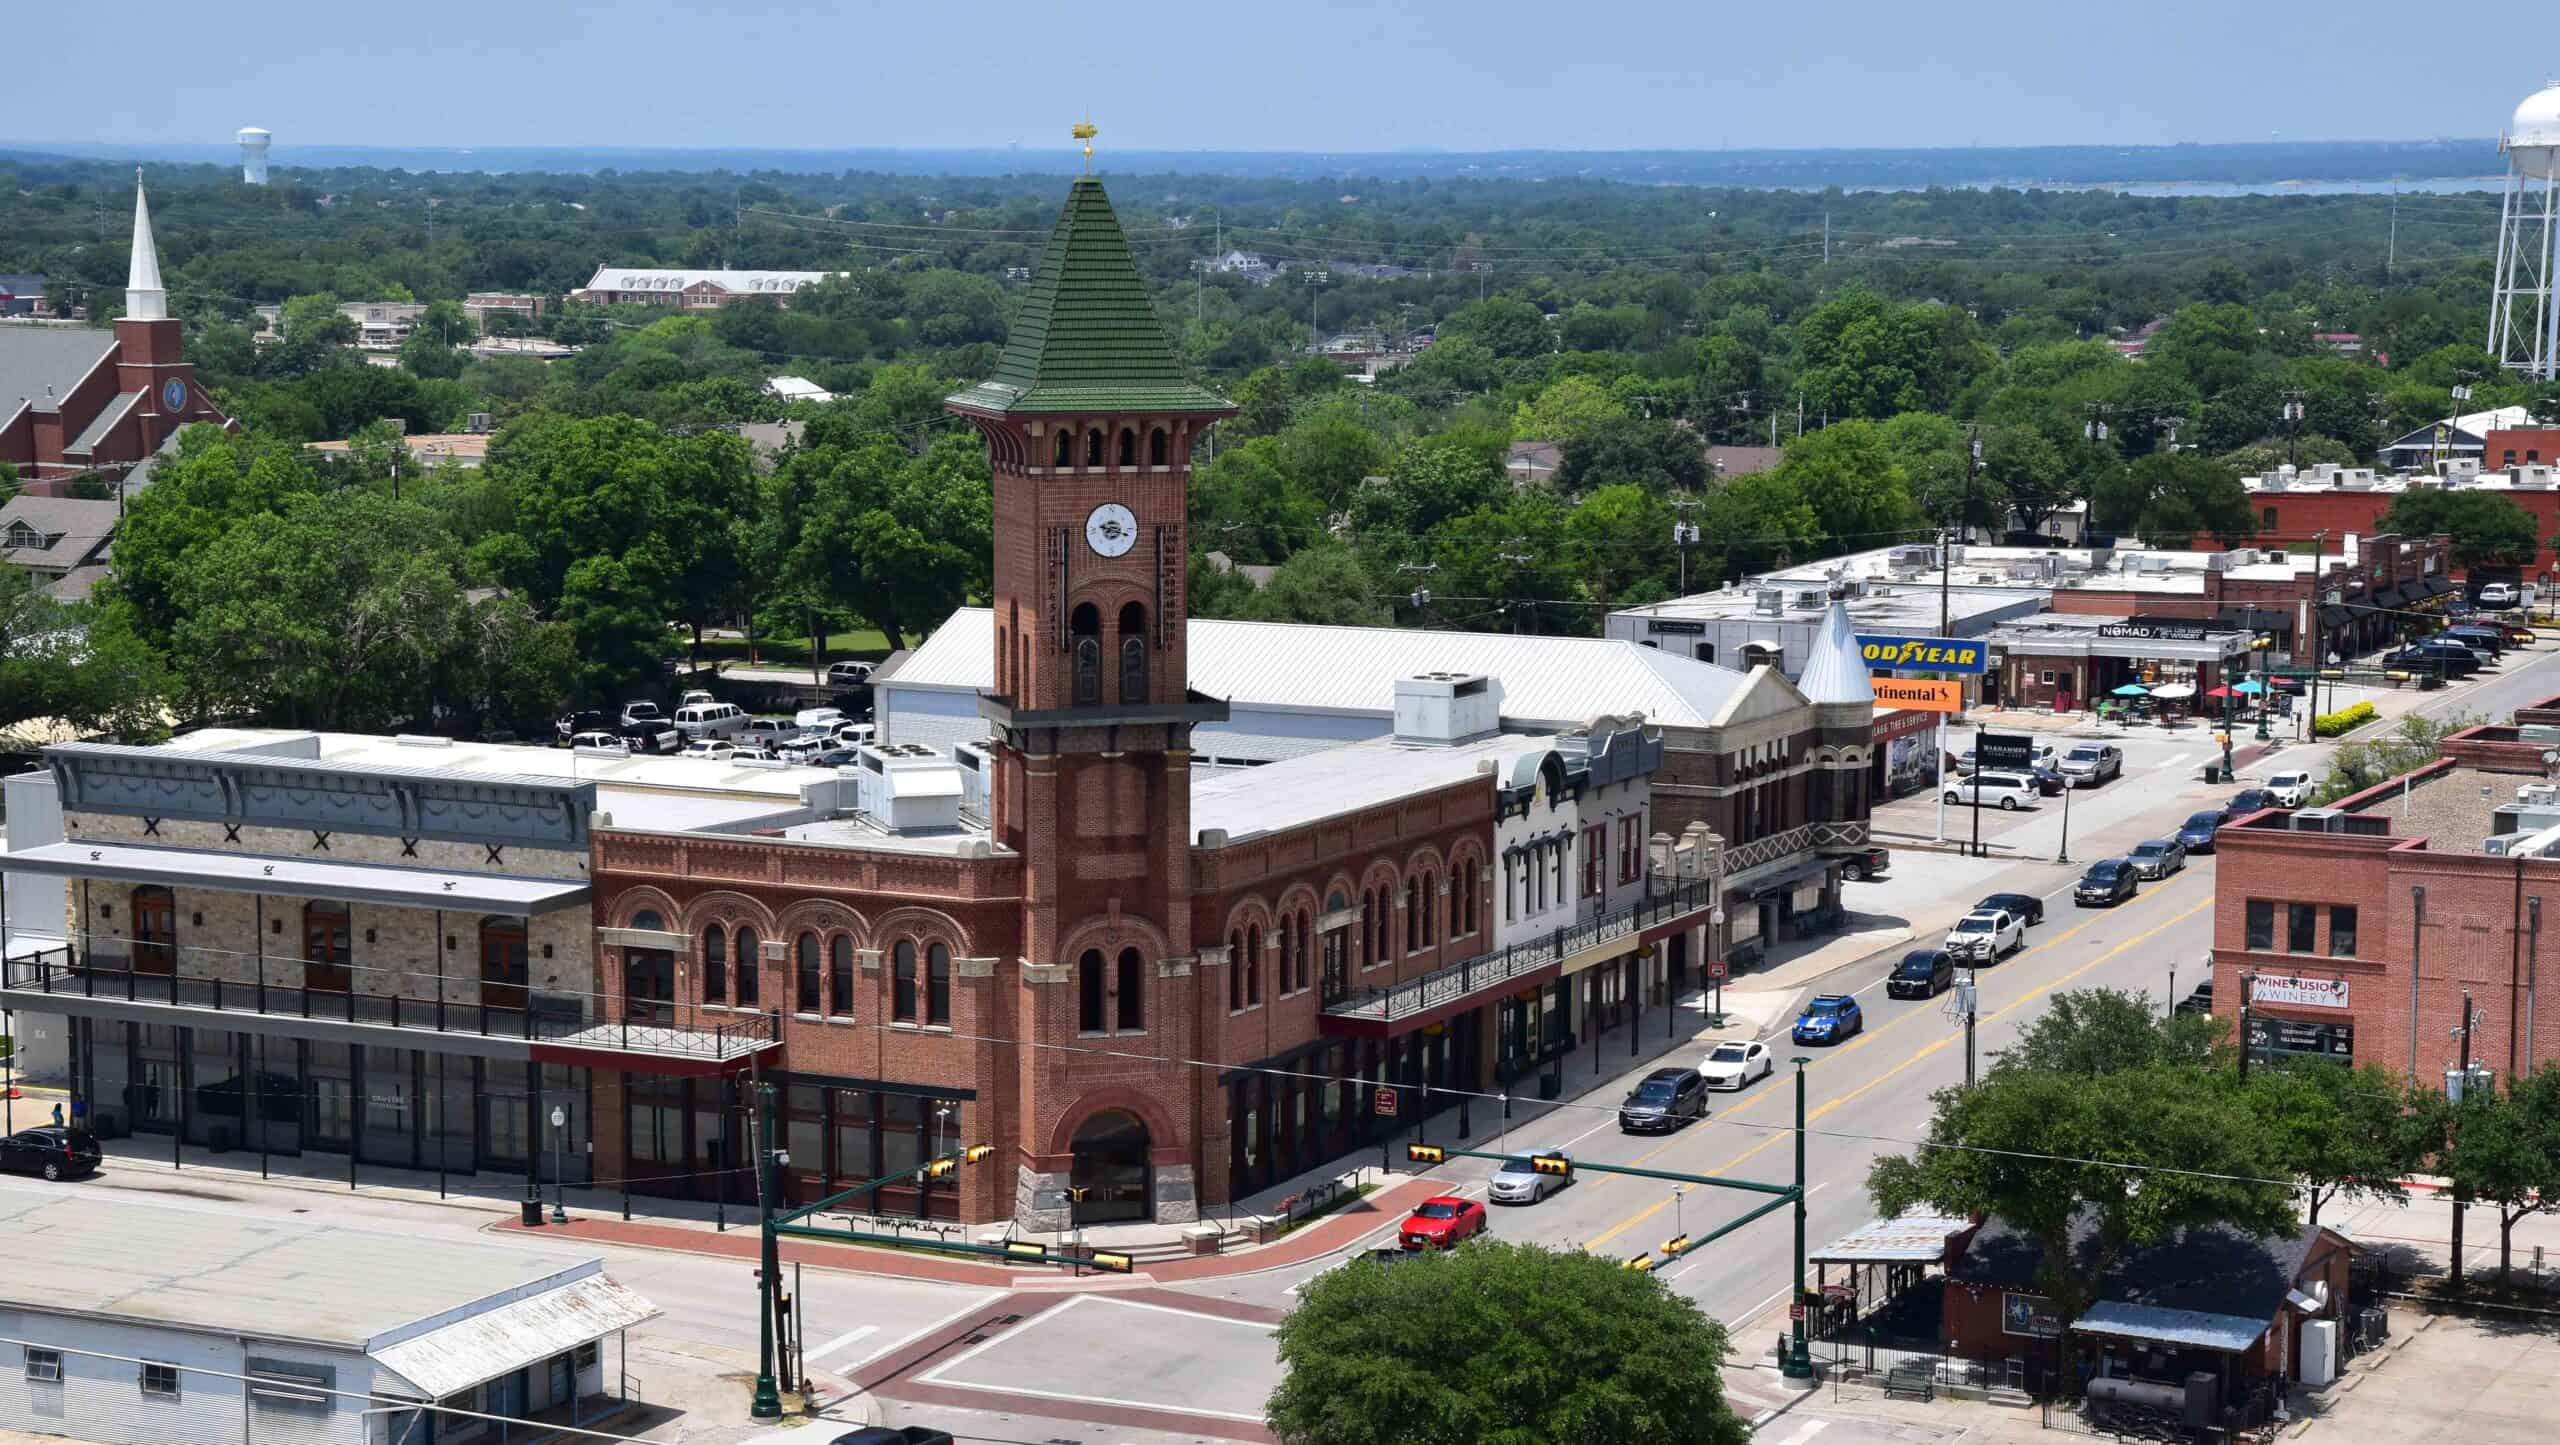 A view of downtown Grapevine, Texas.